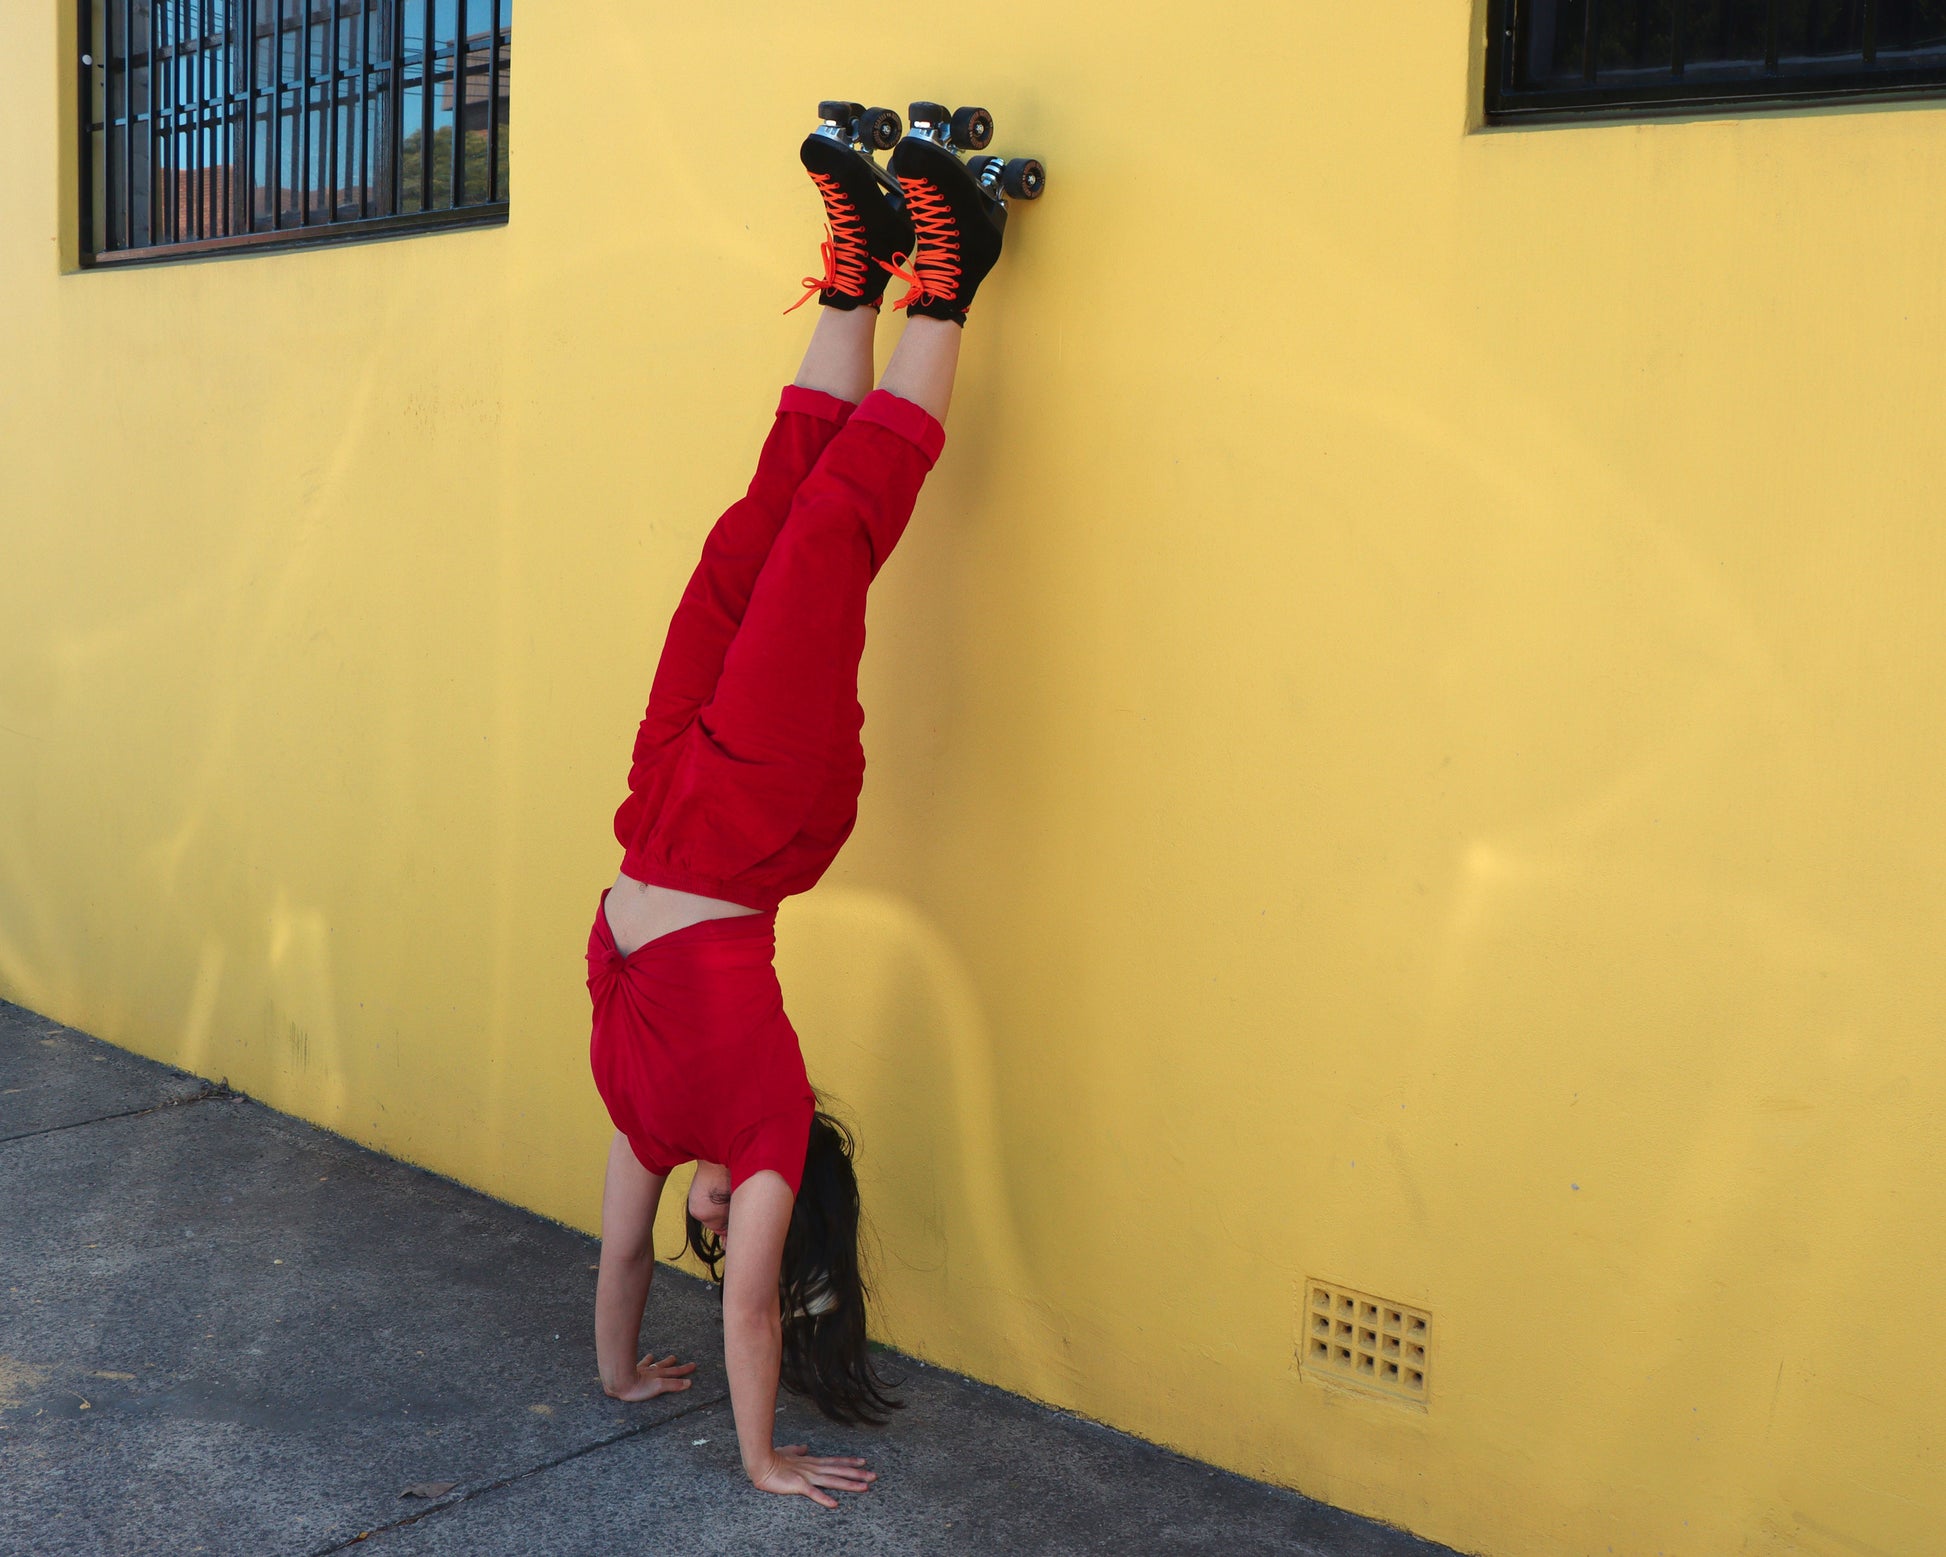 rollerskater doing a handstand wearing Chuffed Skates black roller skates on yellow wall